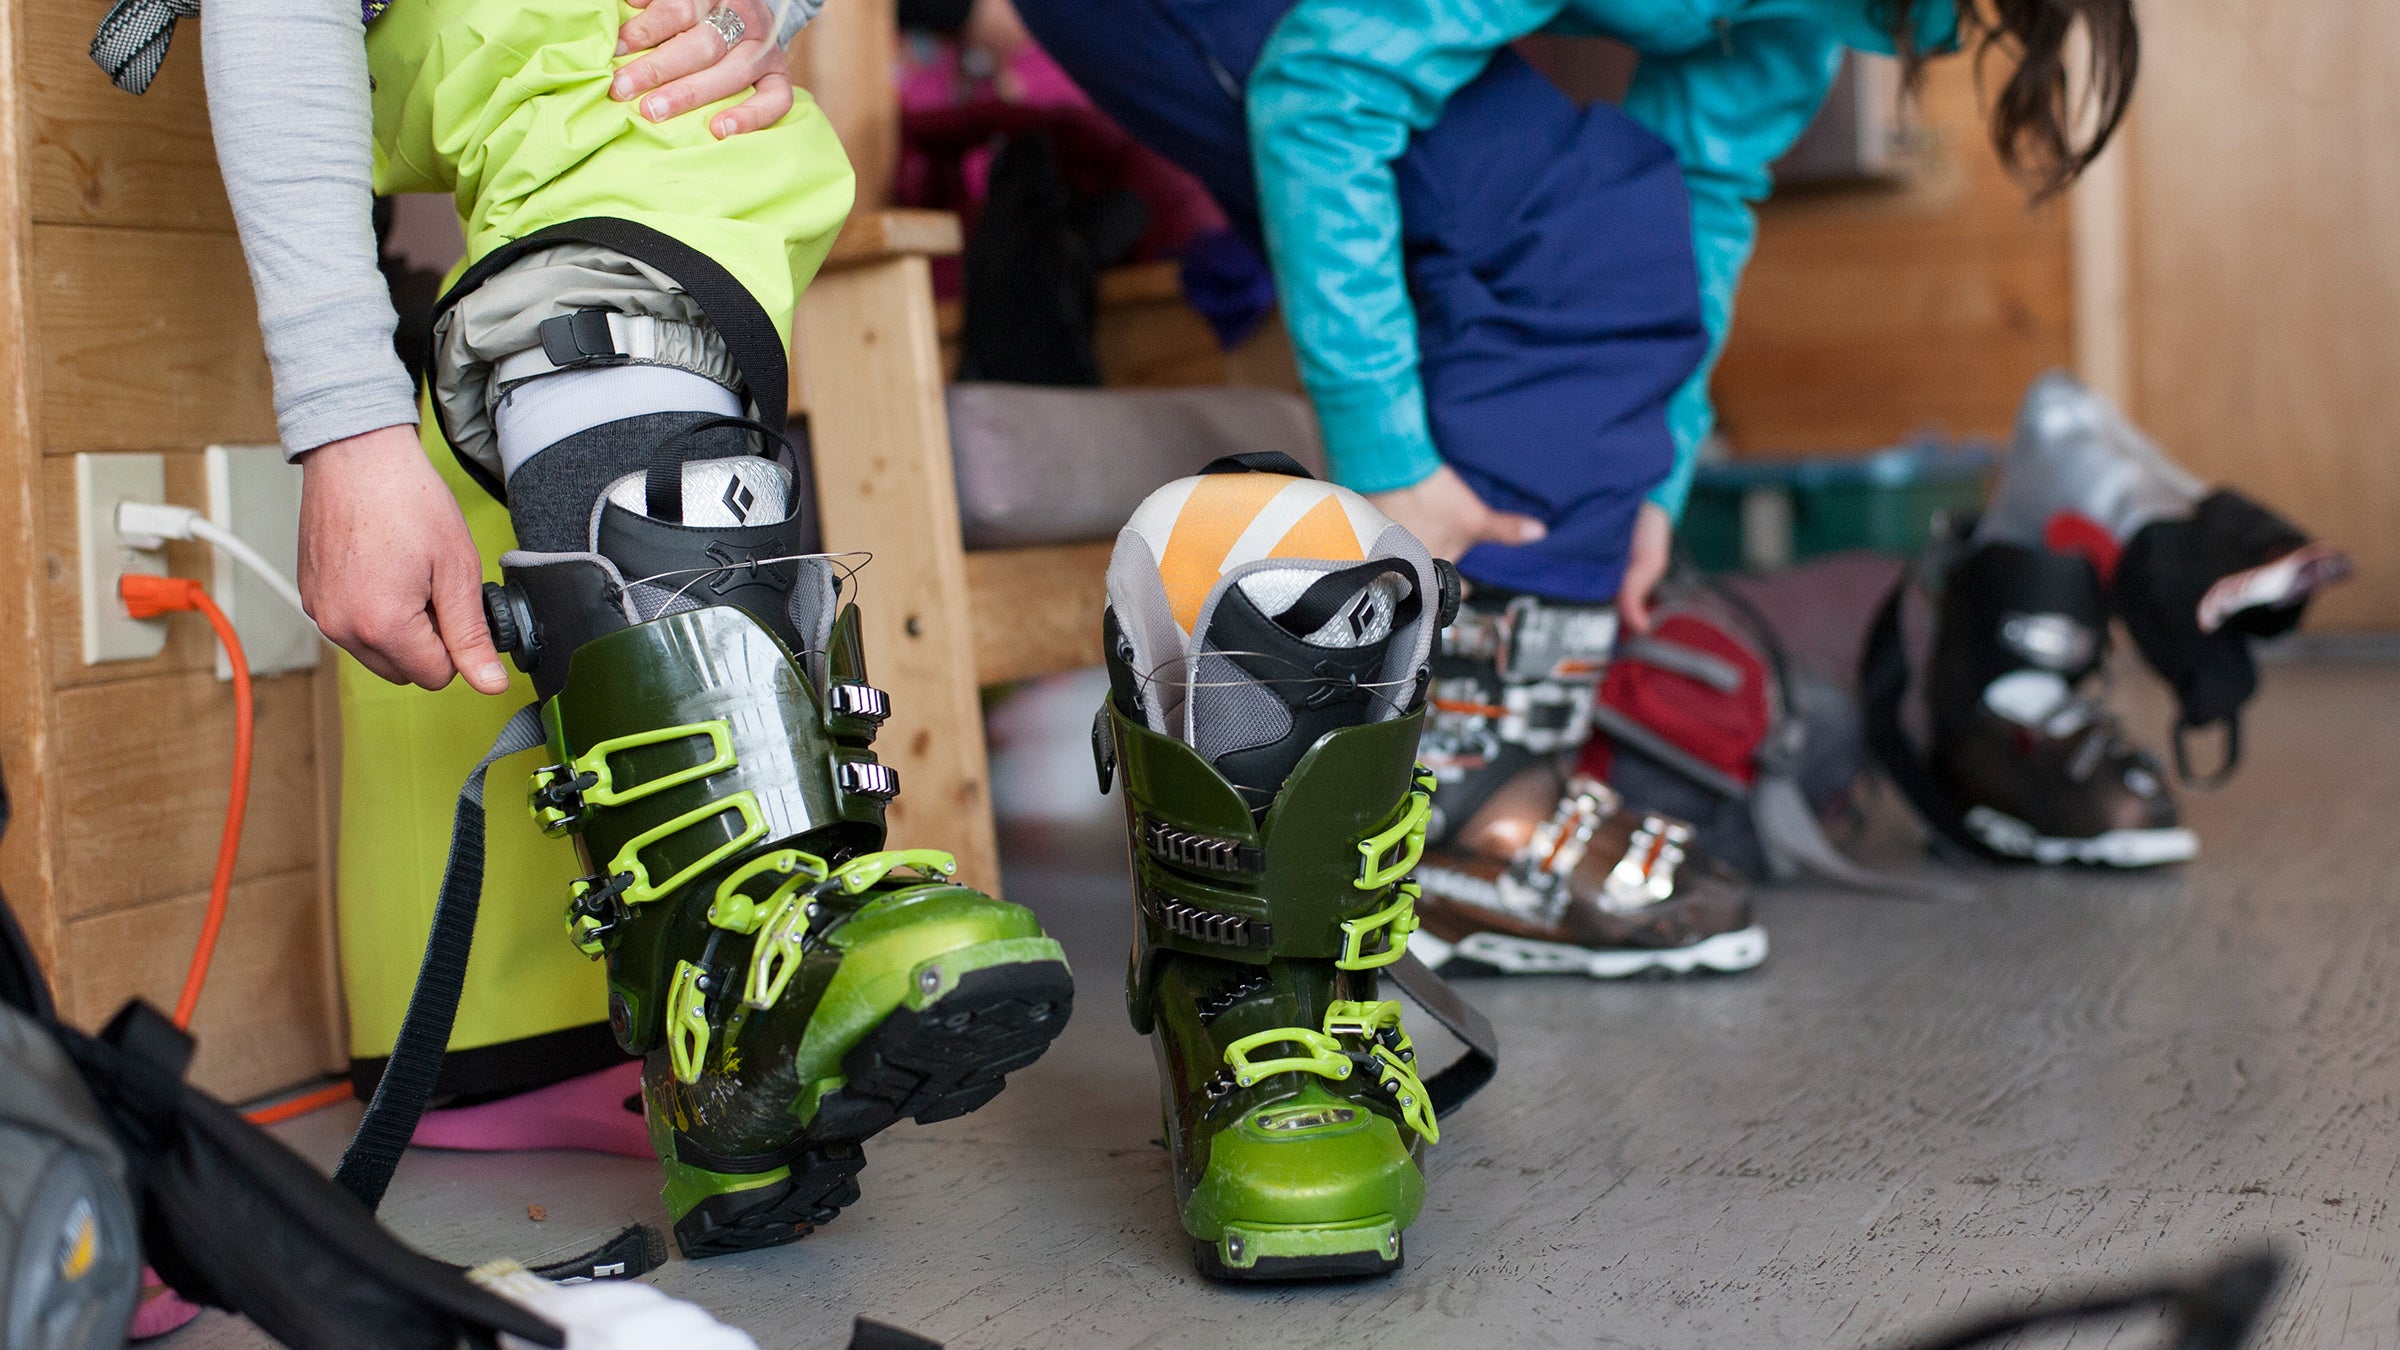 Should ski pants be tight or loose? - Knowledge